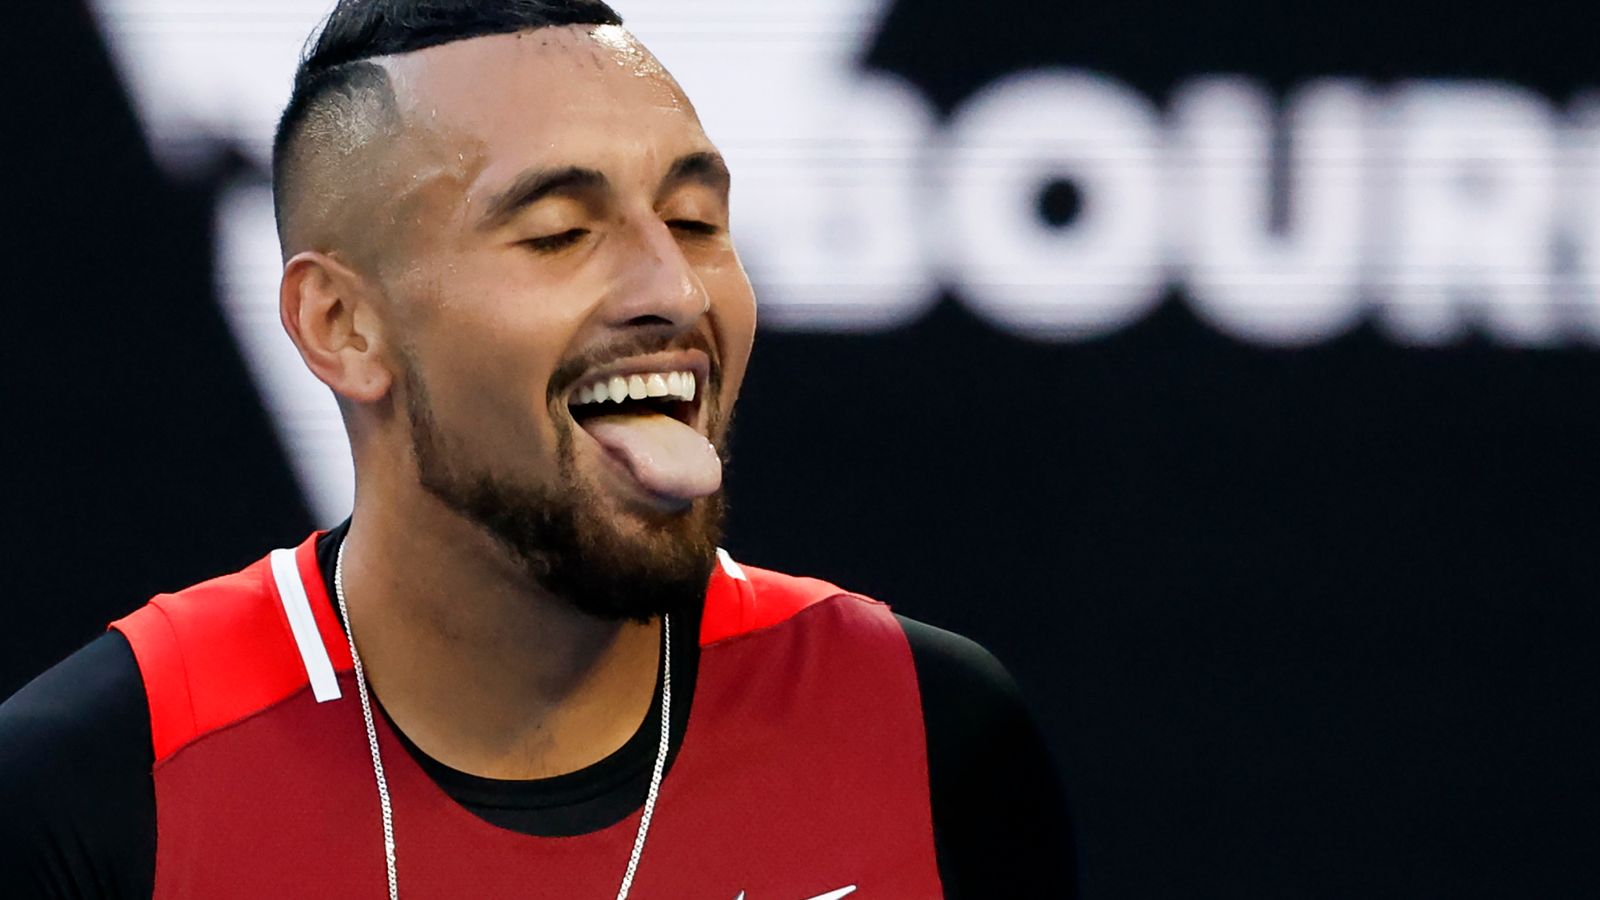 Nick Kyrgios: Michael Venus says he can see why Australian has 'never fulfilled his potential' - Sky Sports